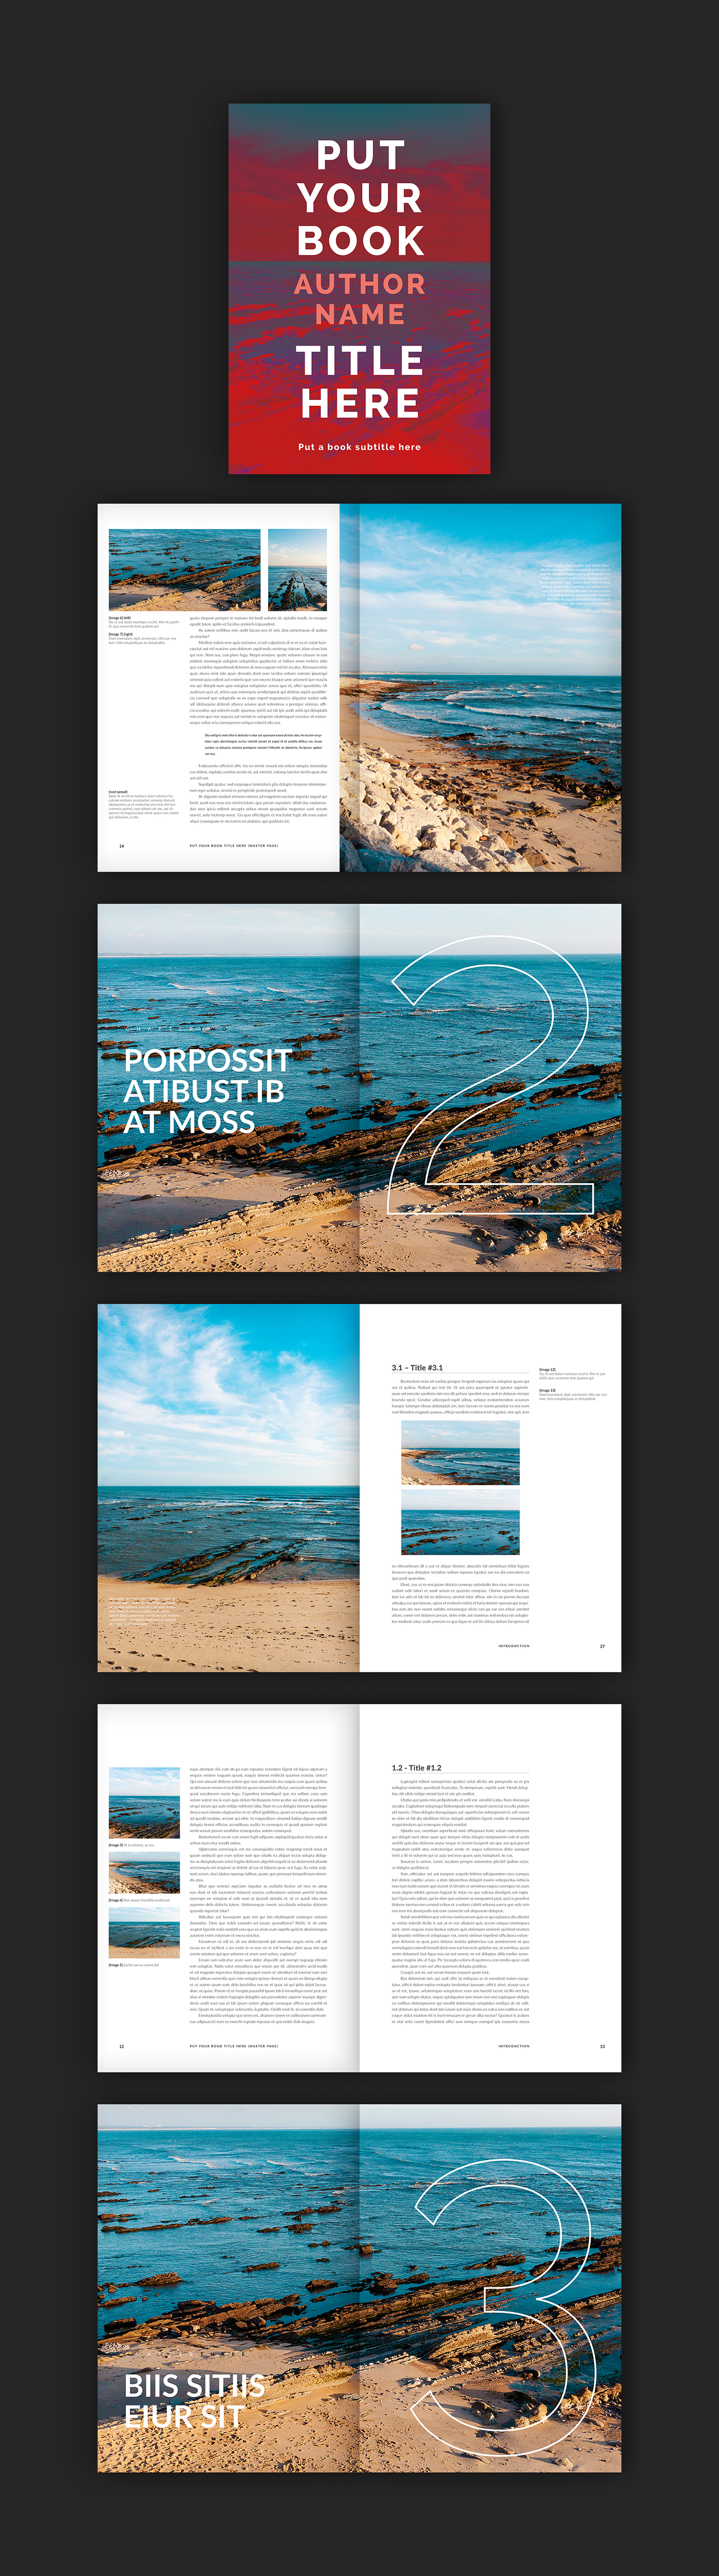 template download book a4 Layout adobe InDesign paper sample